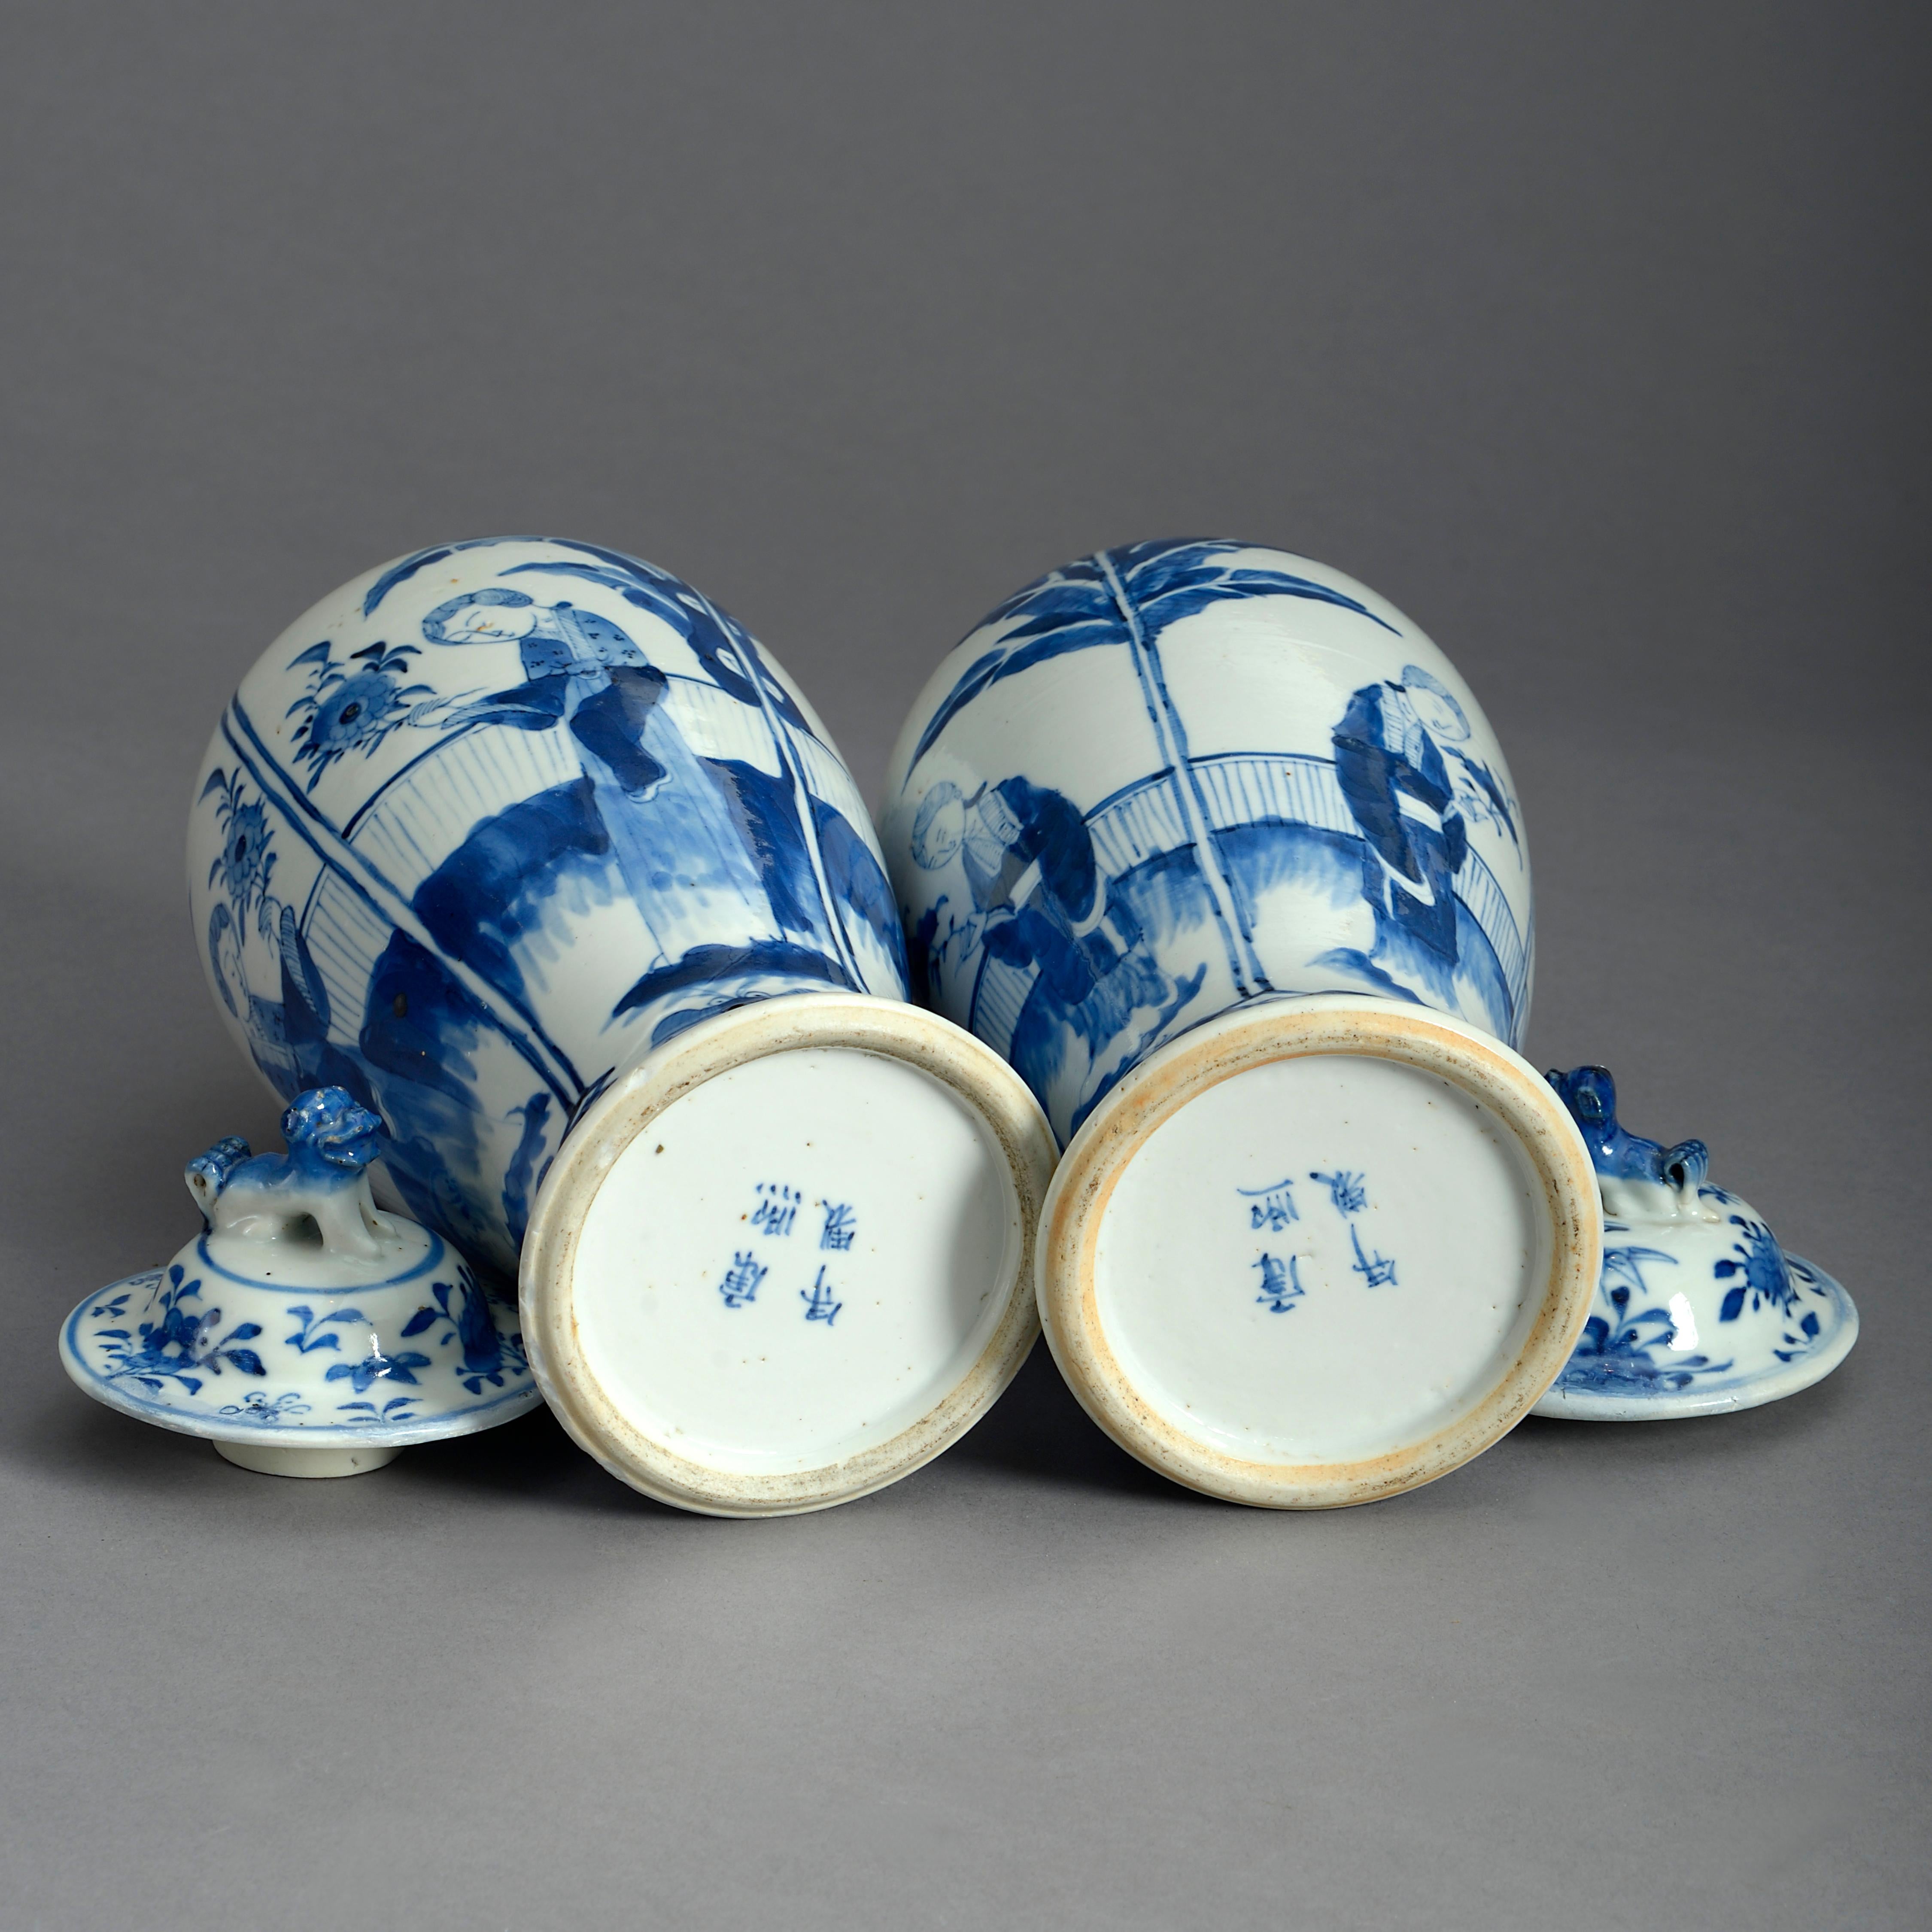 Chinese Pair of 19th Century Blue and White Porcelain Vases and Covers in the Kangxi Tas